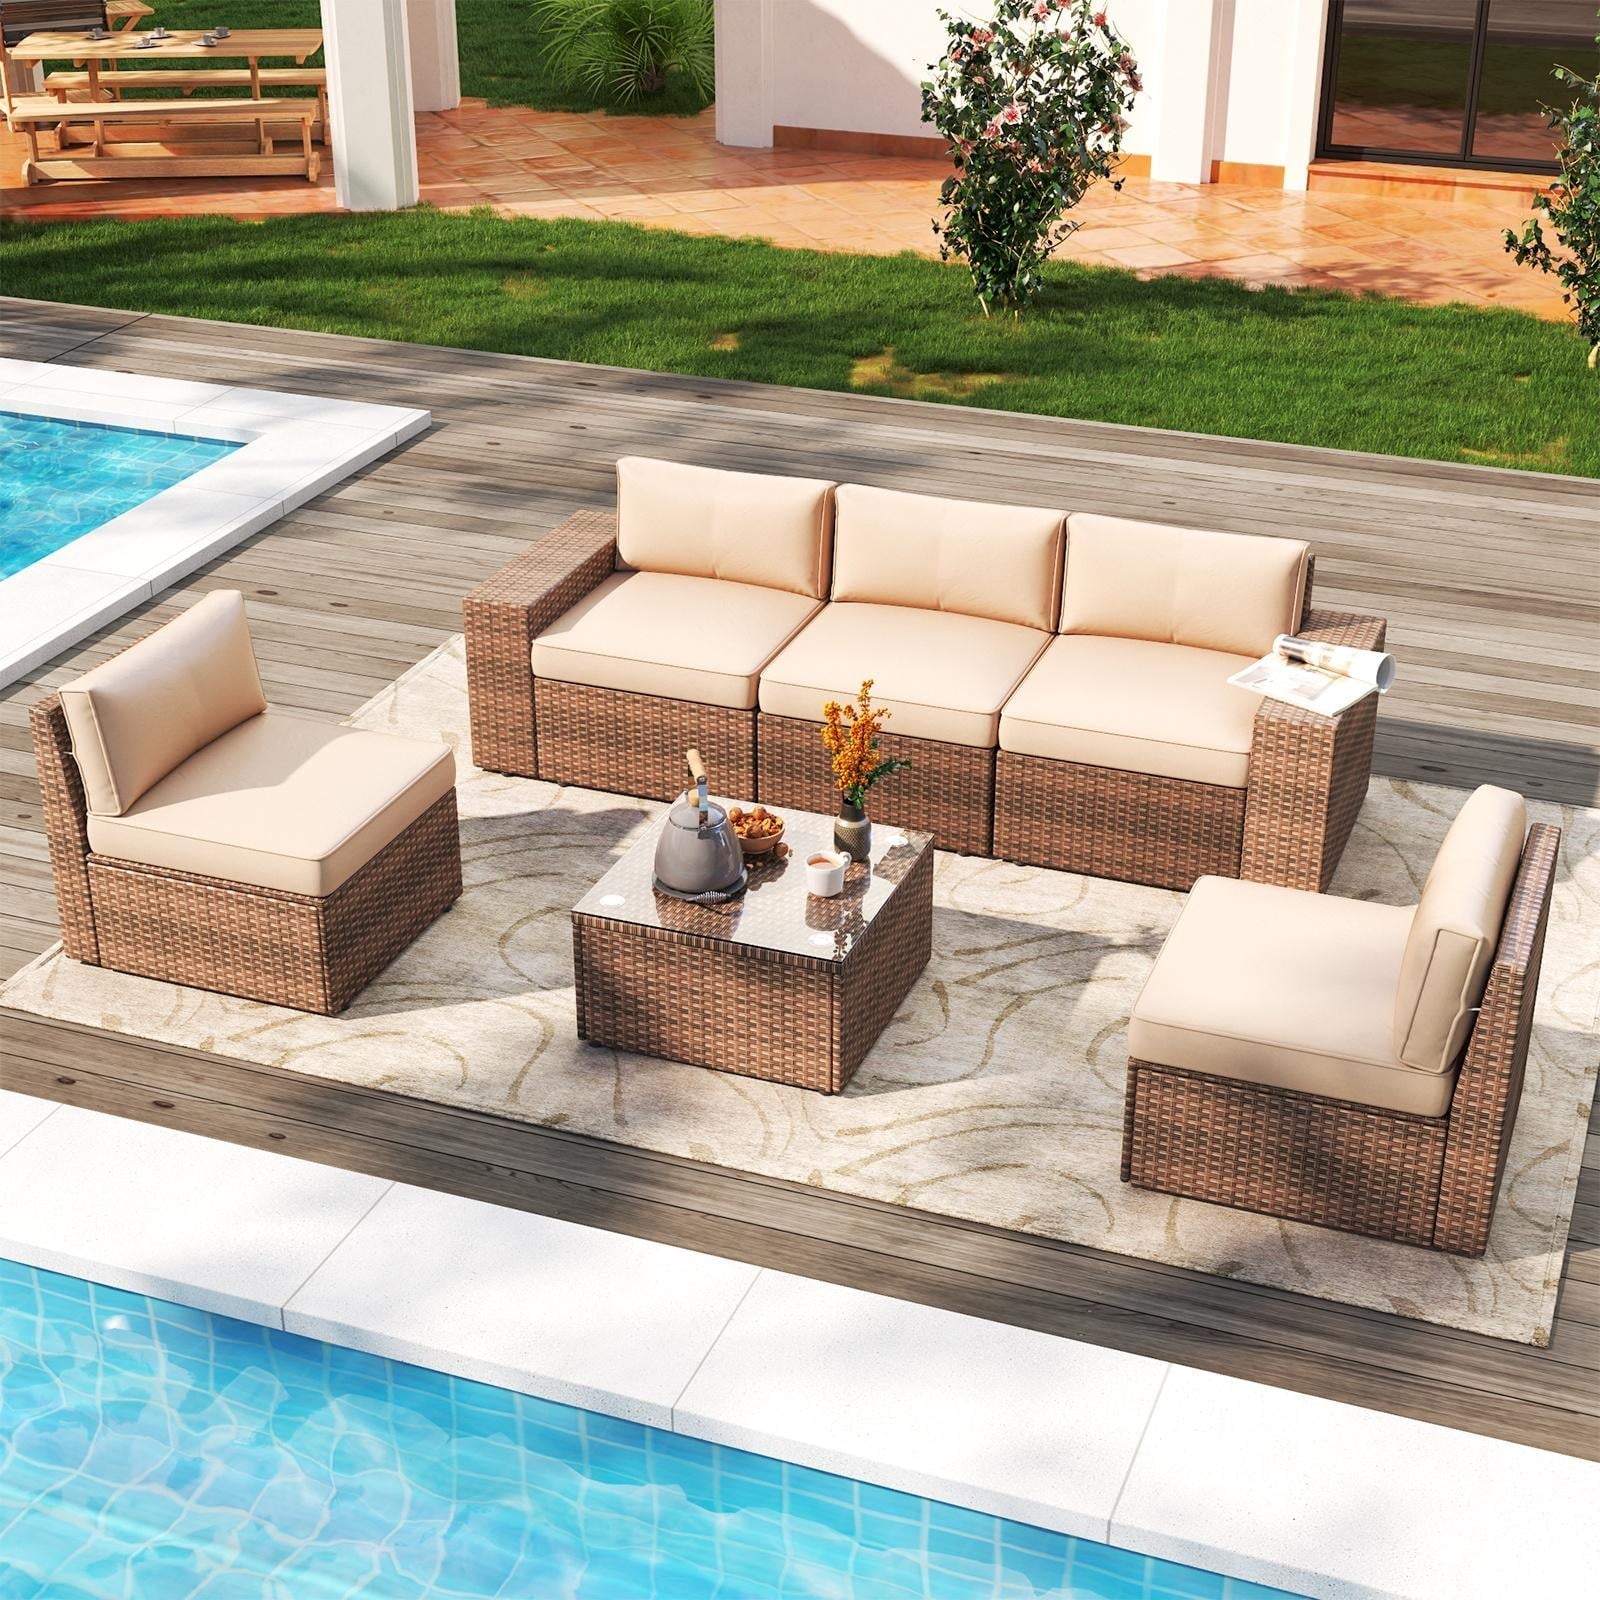 6 Pieces Patio Furniture Sets, Outdoor Sectional Rattan Sofa Set, Patio Furniture Set with Coffee Table, Beige